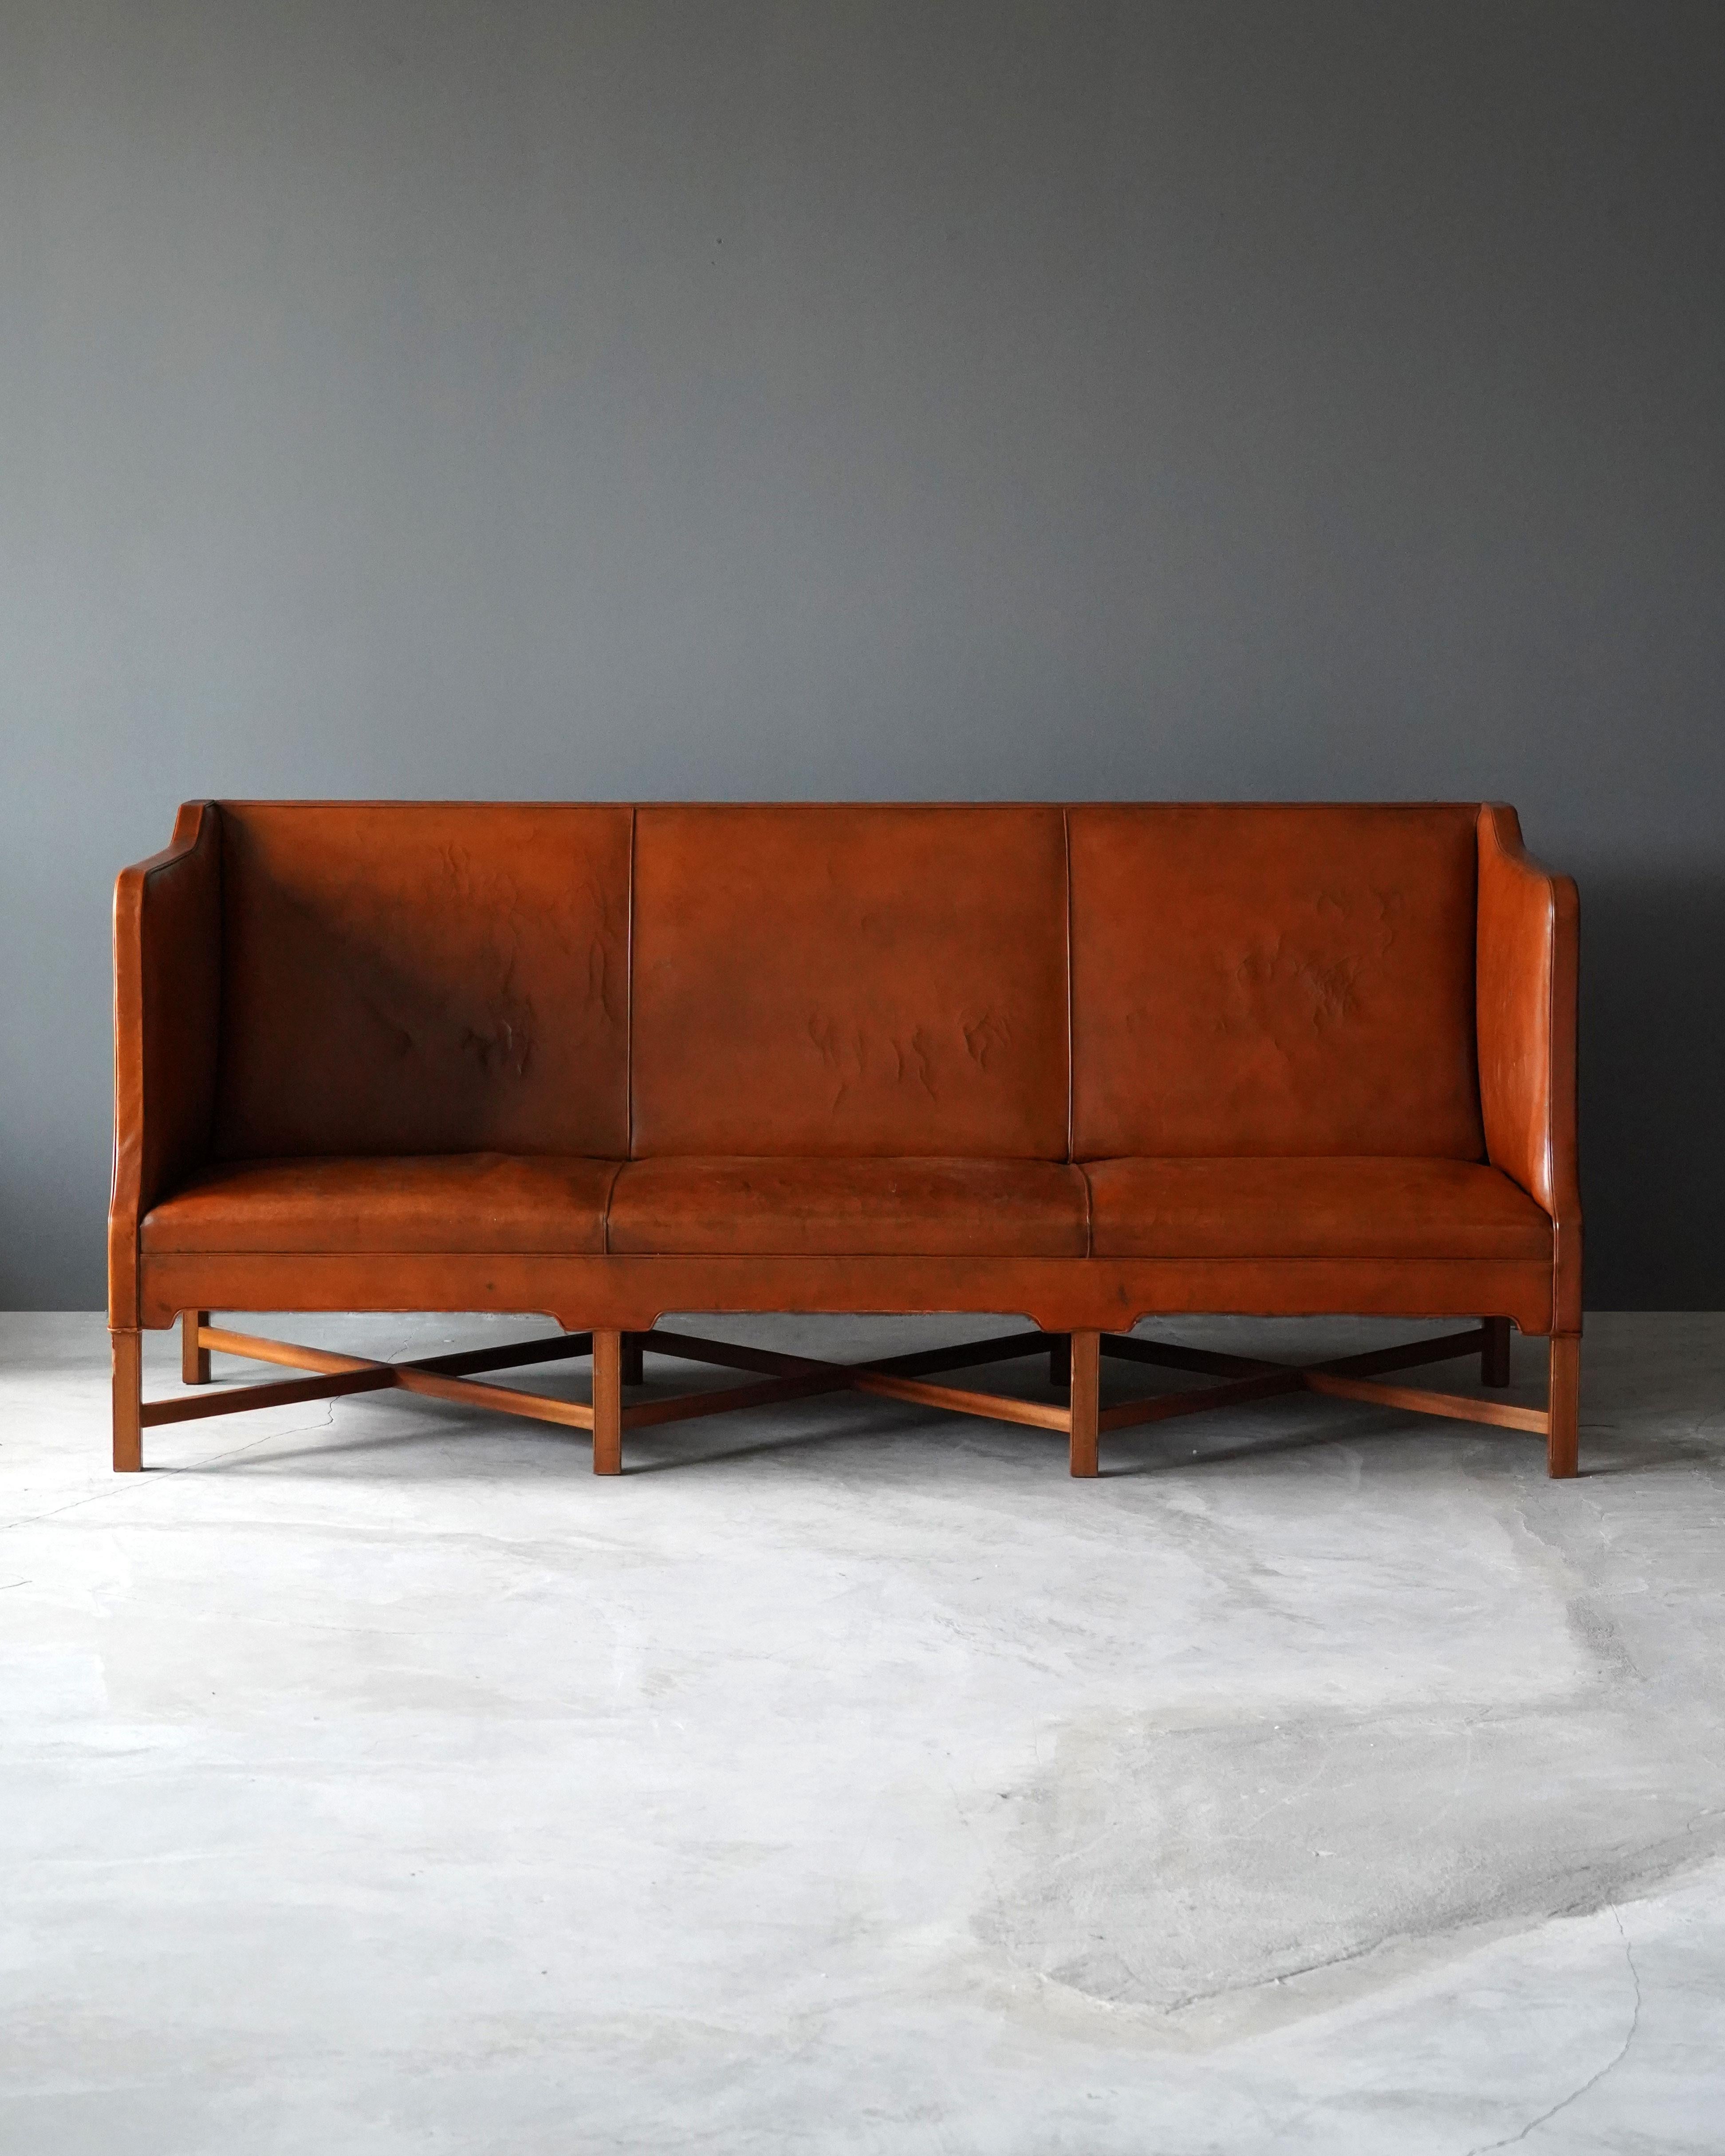 An early all-original sofa. Designed by Kaare Klint, produced by cabinetmaker rud Rasmussen, Denmark, c. 1940s. Designed in 1937.

Legs in mahogany.